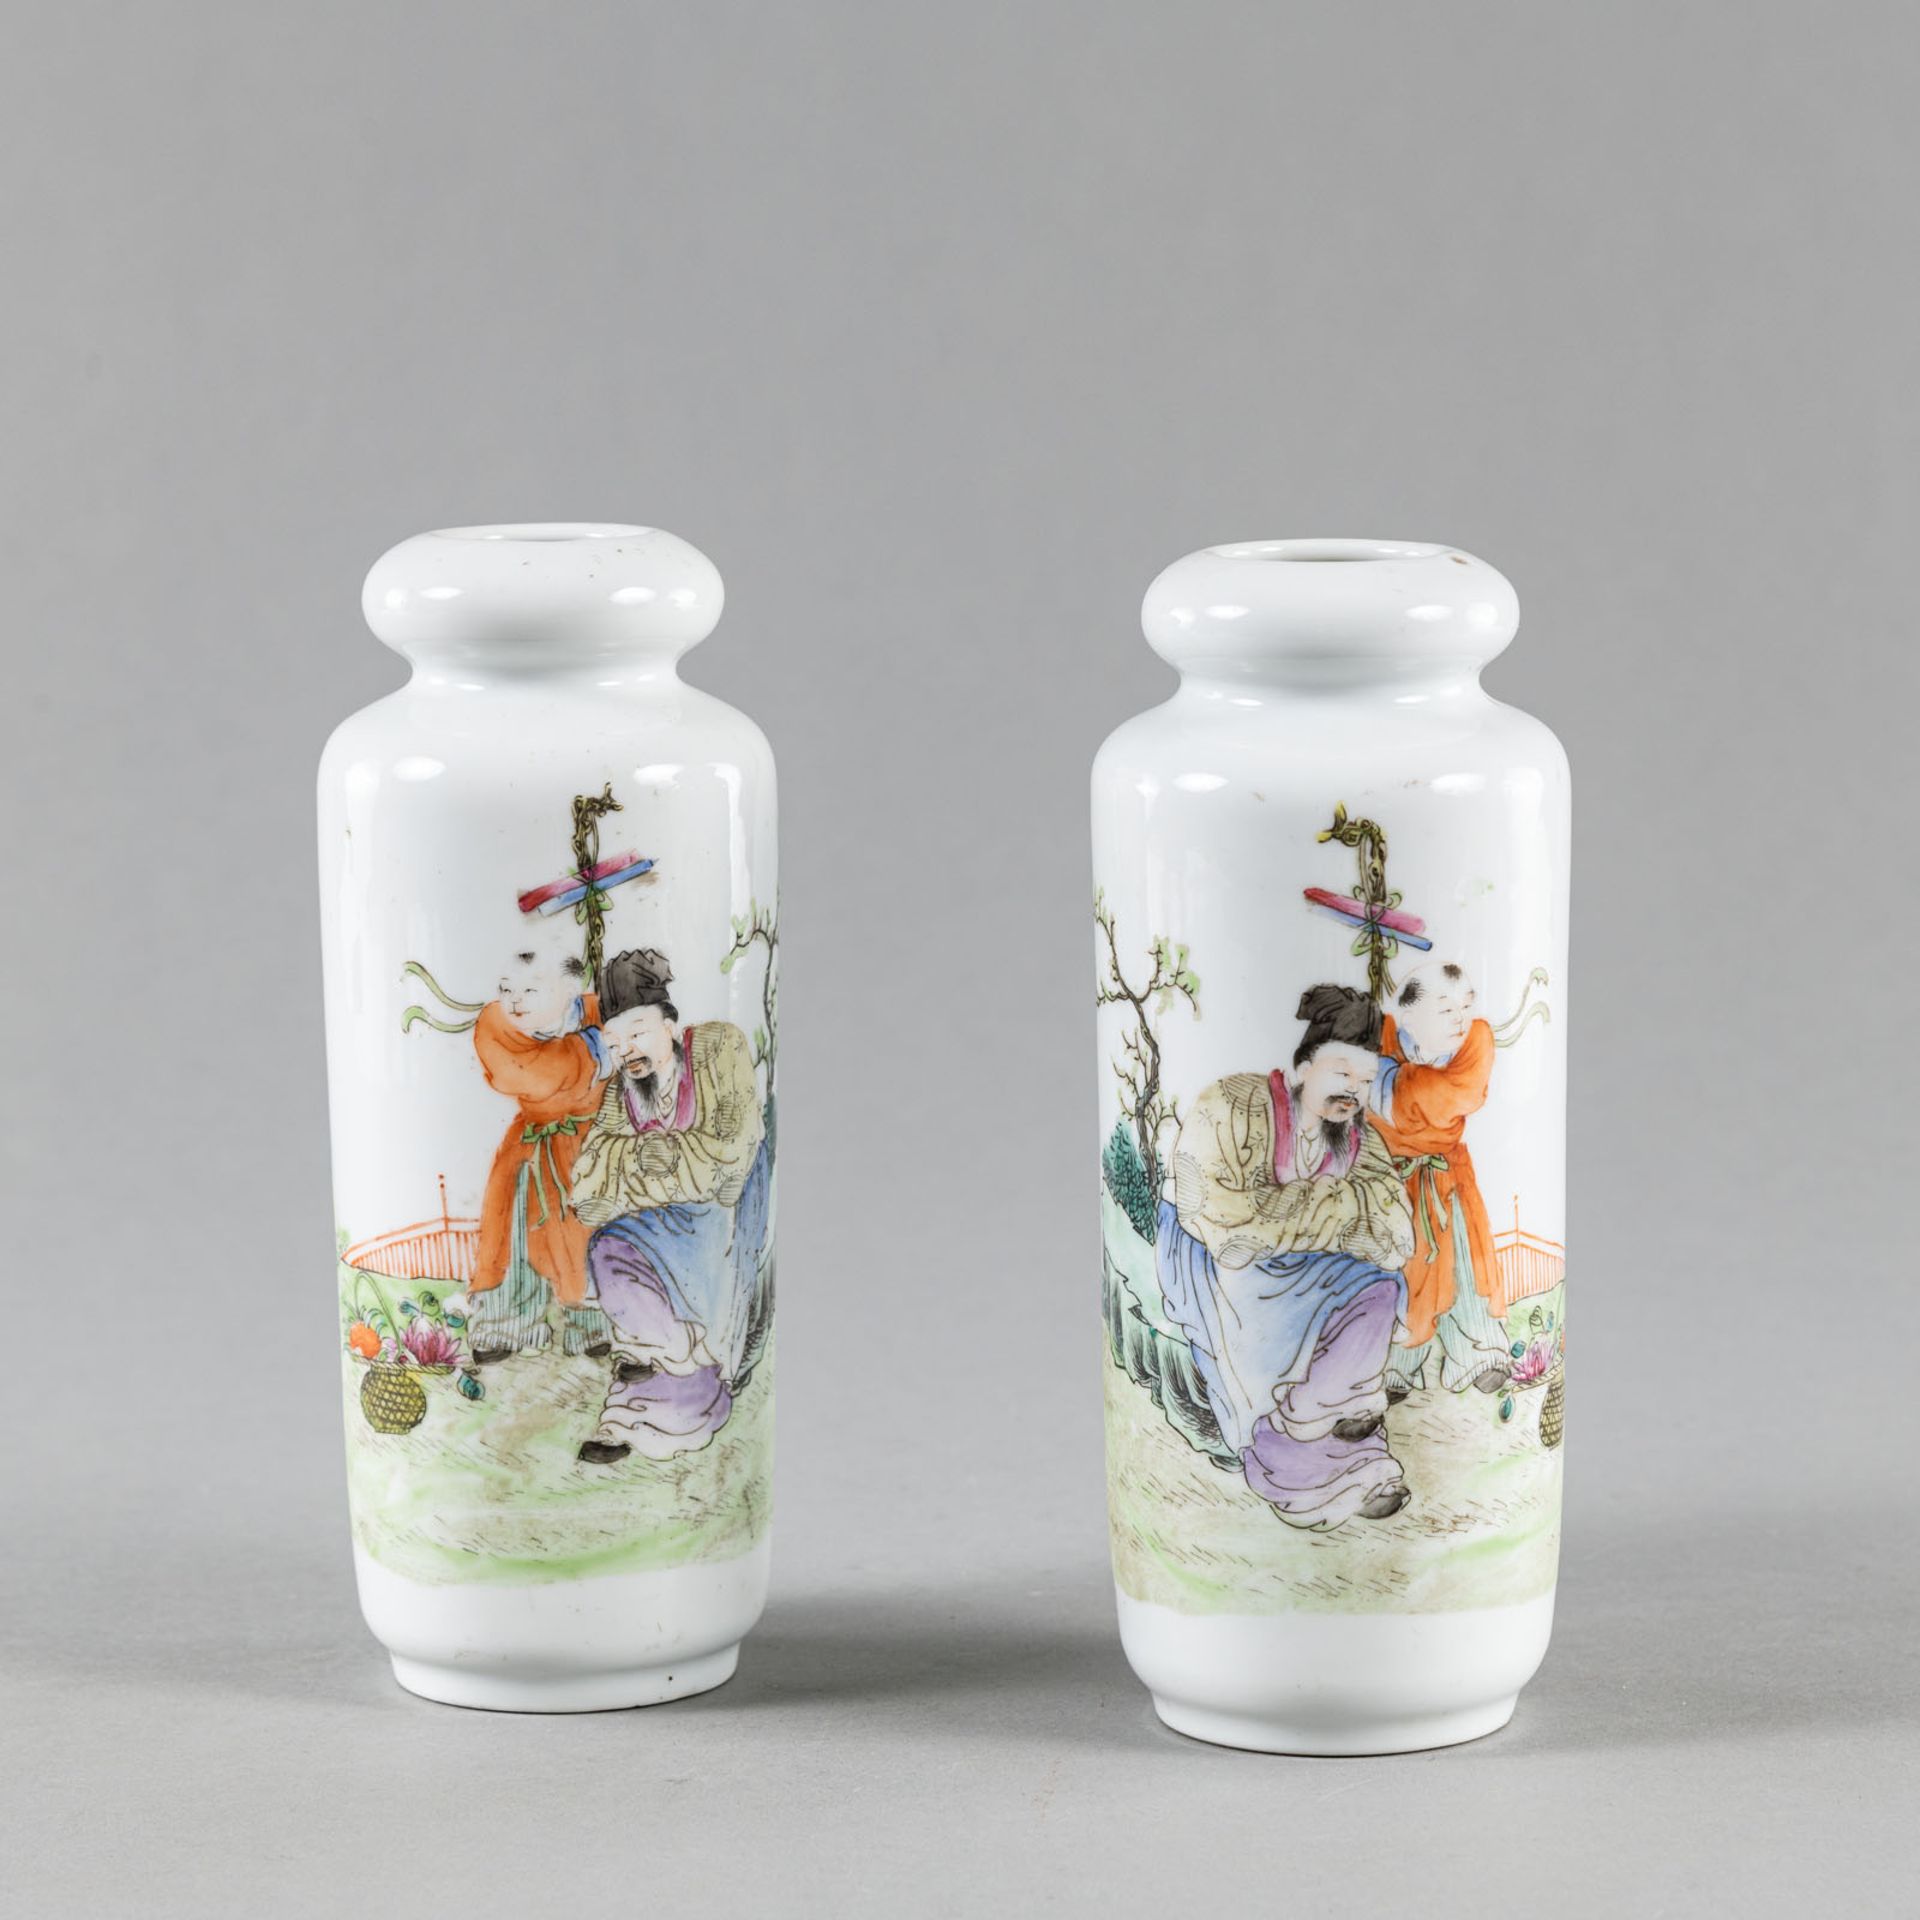 A PAIR OF CYLINDRICAL 'FAMILLE ROSE' SCHOLAR WITH BOY VASES